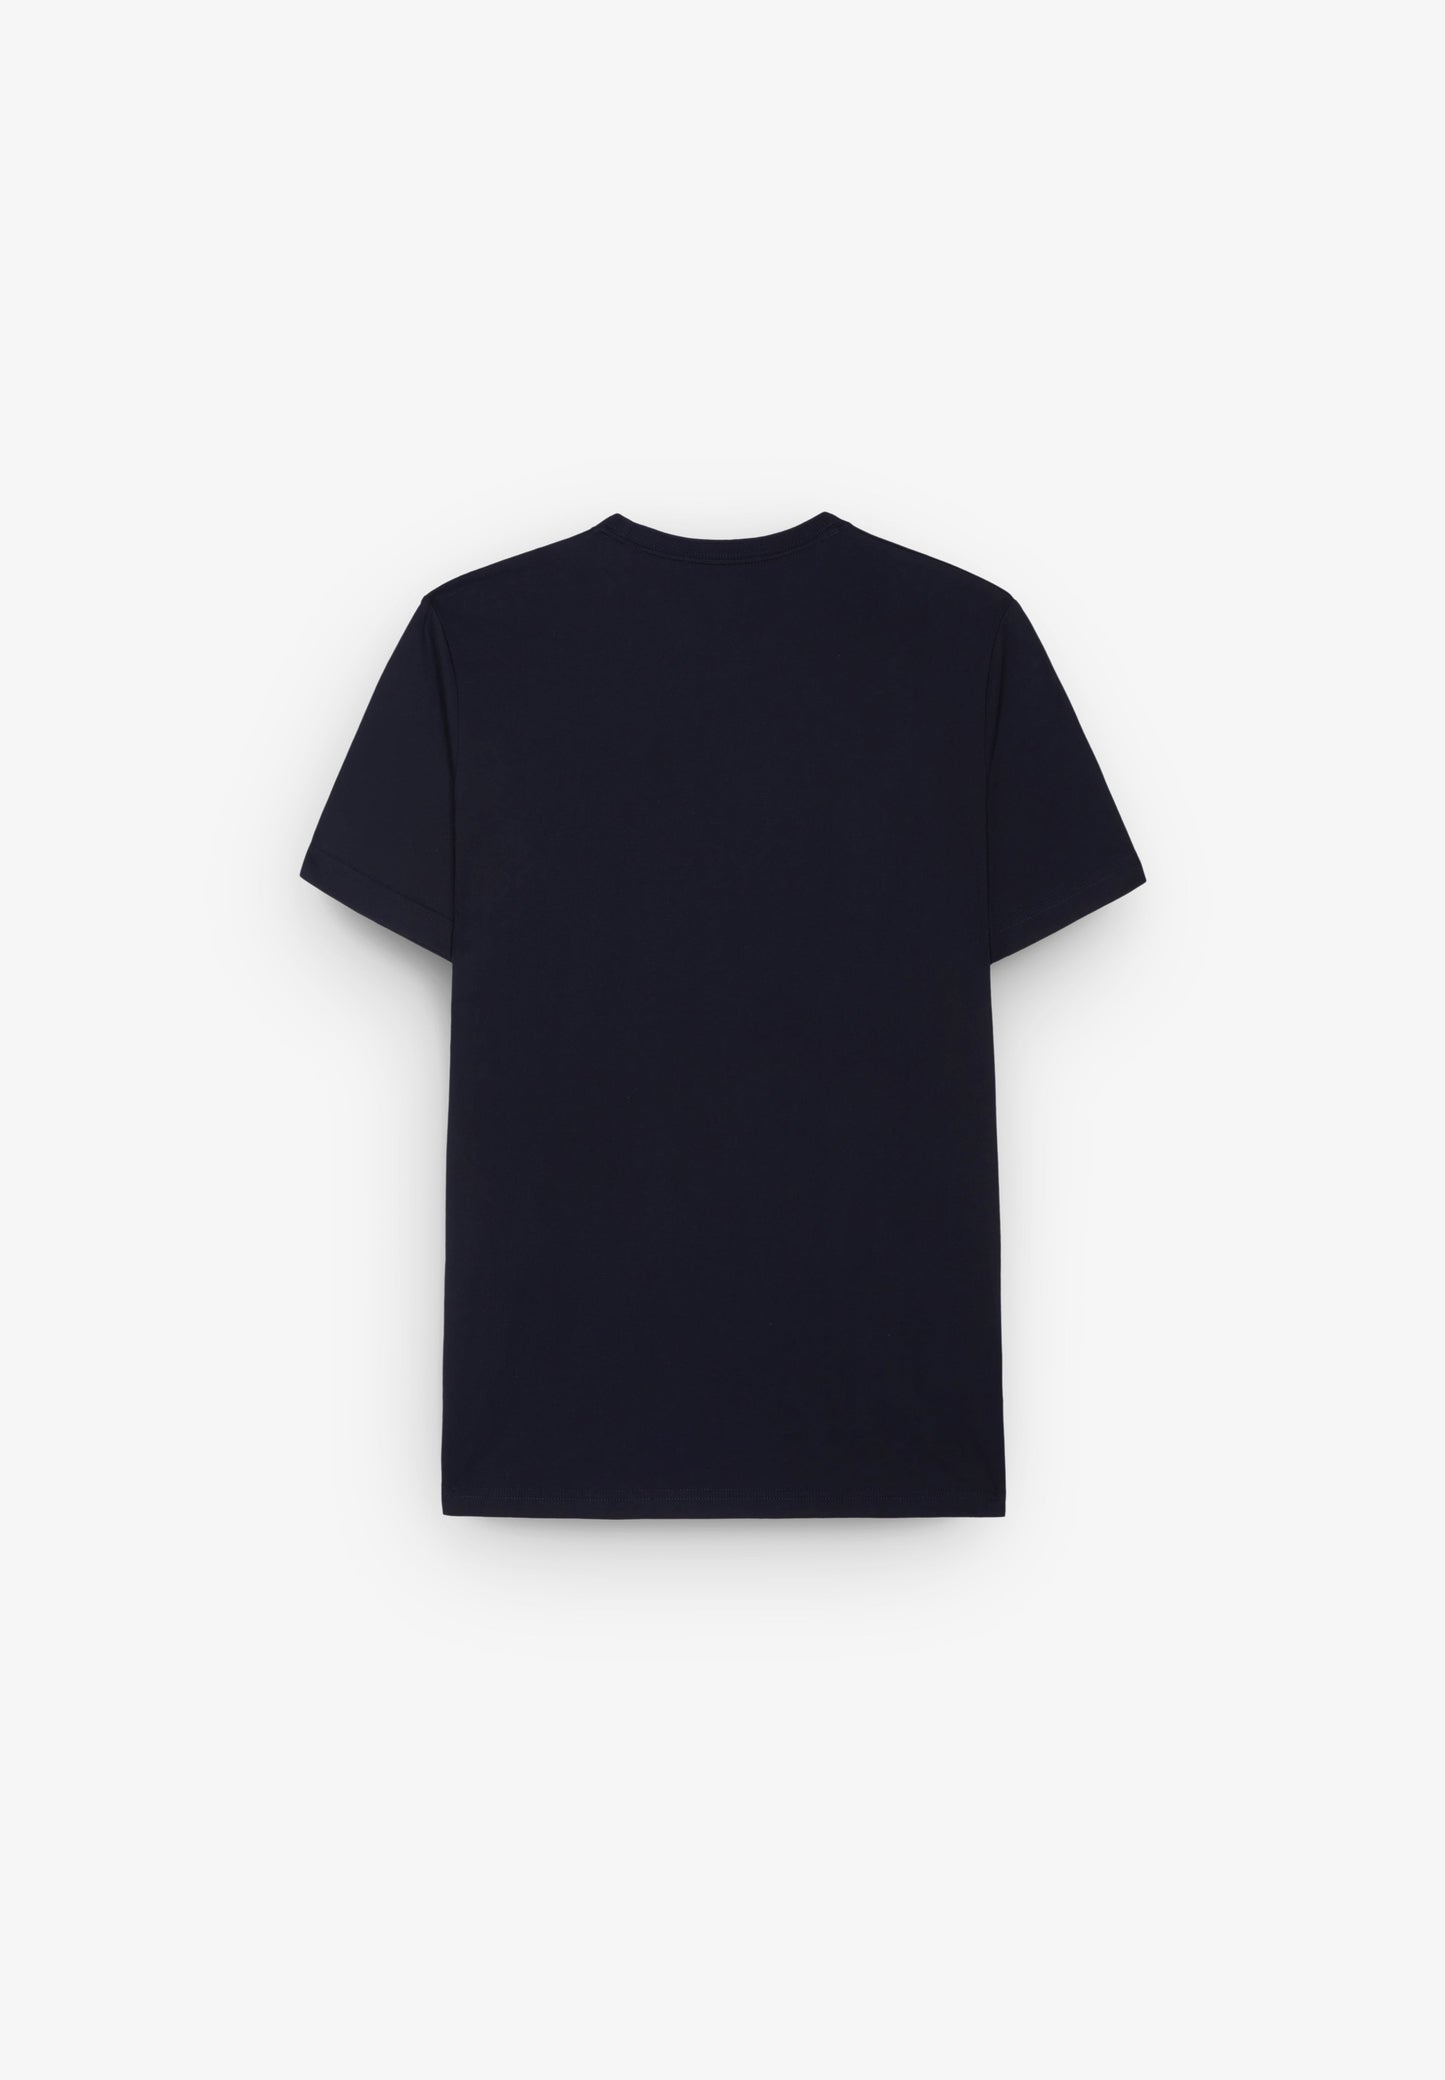 FRED PERRY | T-SHIRT CREW NECK